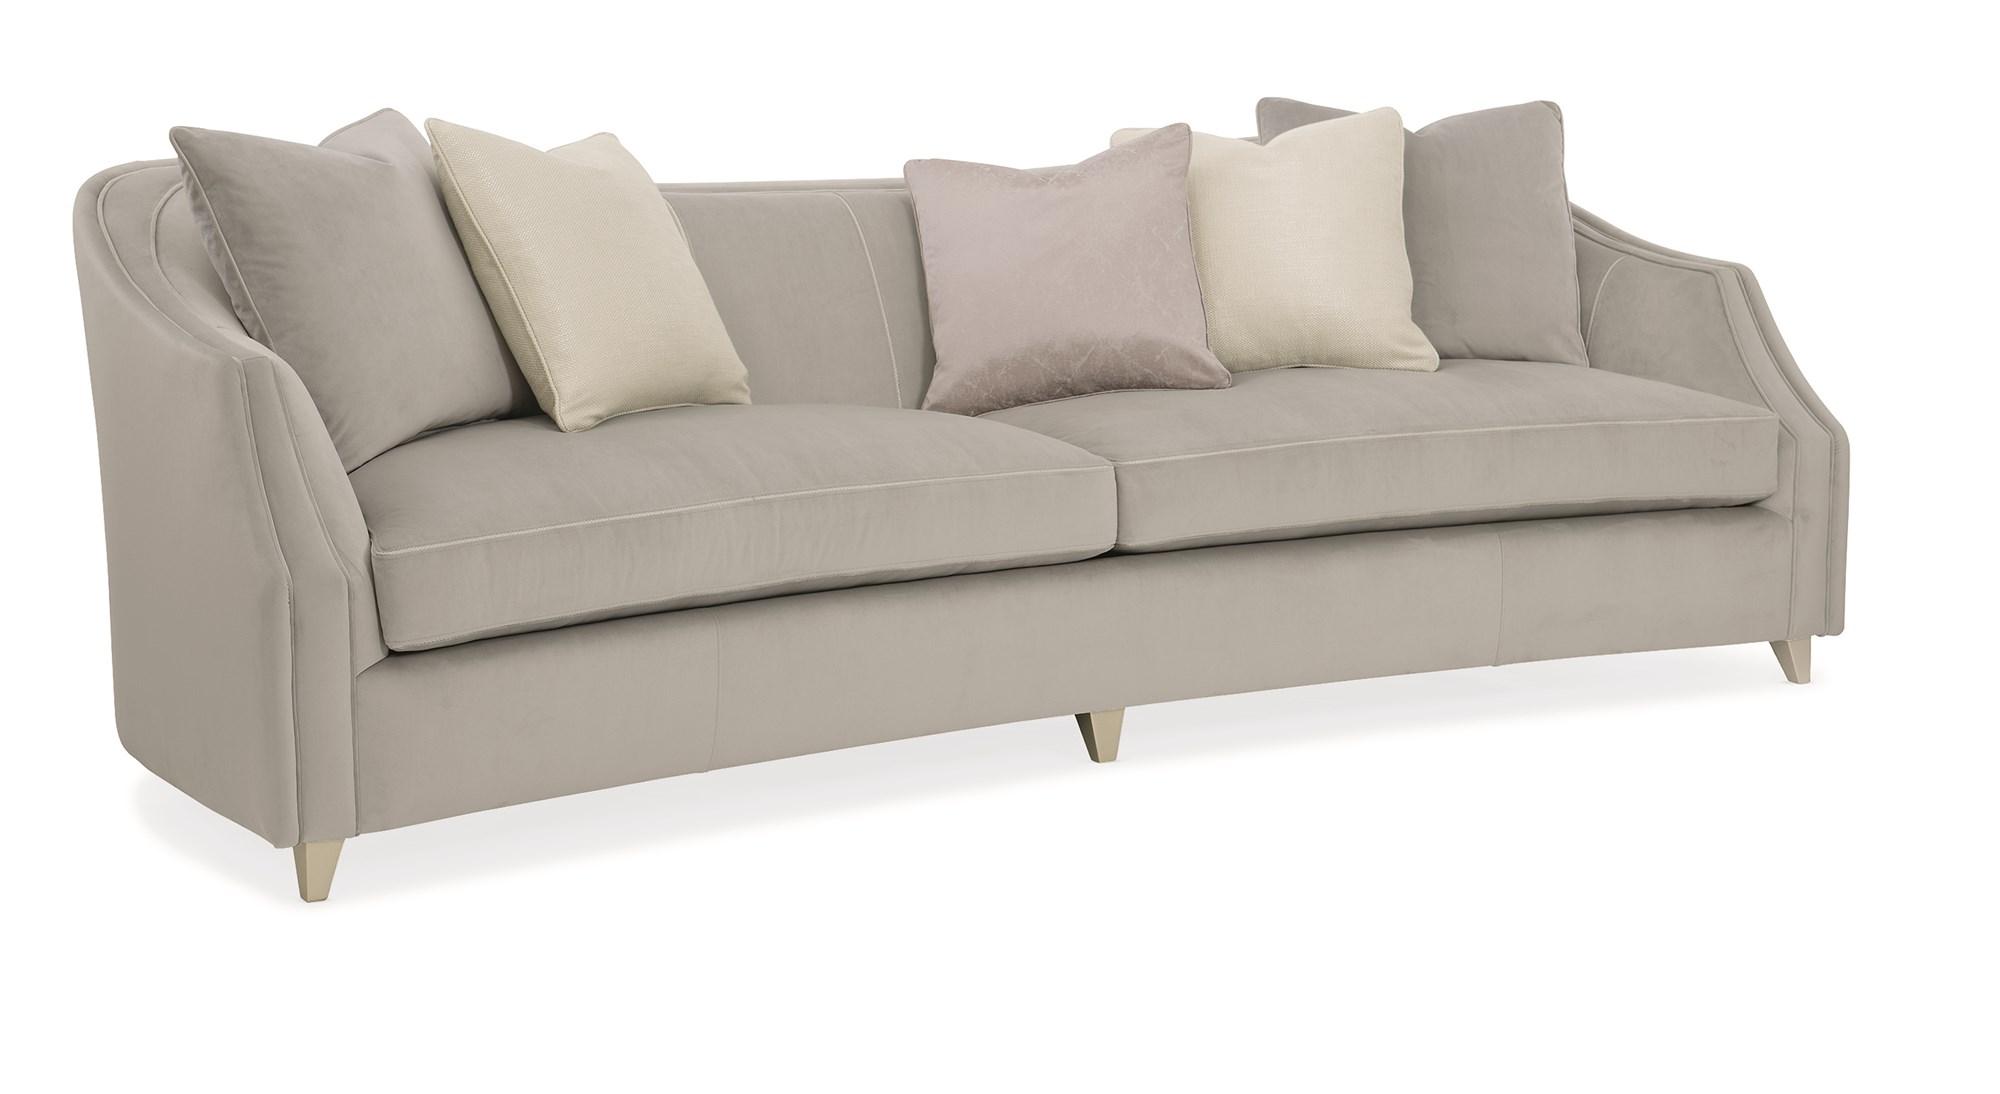 

    
Dove Grey Velvet Fabric & Taupe Paint Finish Sofa SEAMS TO ME by Caracole
